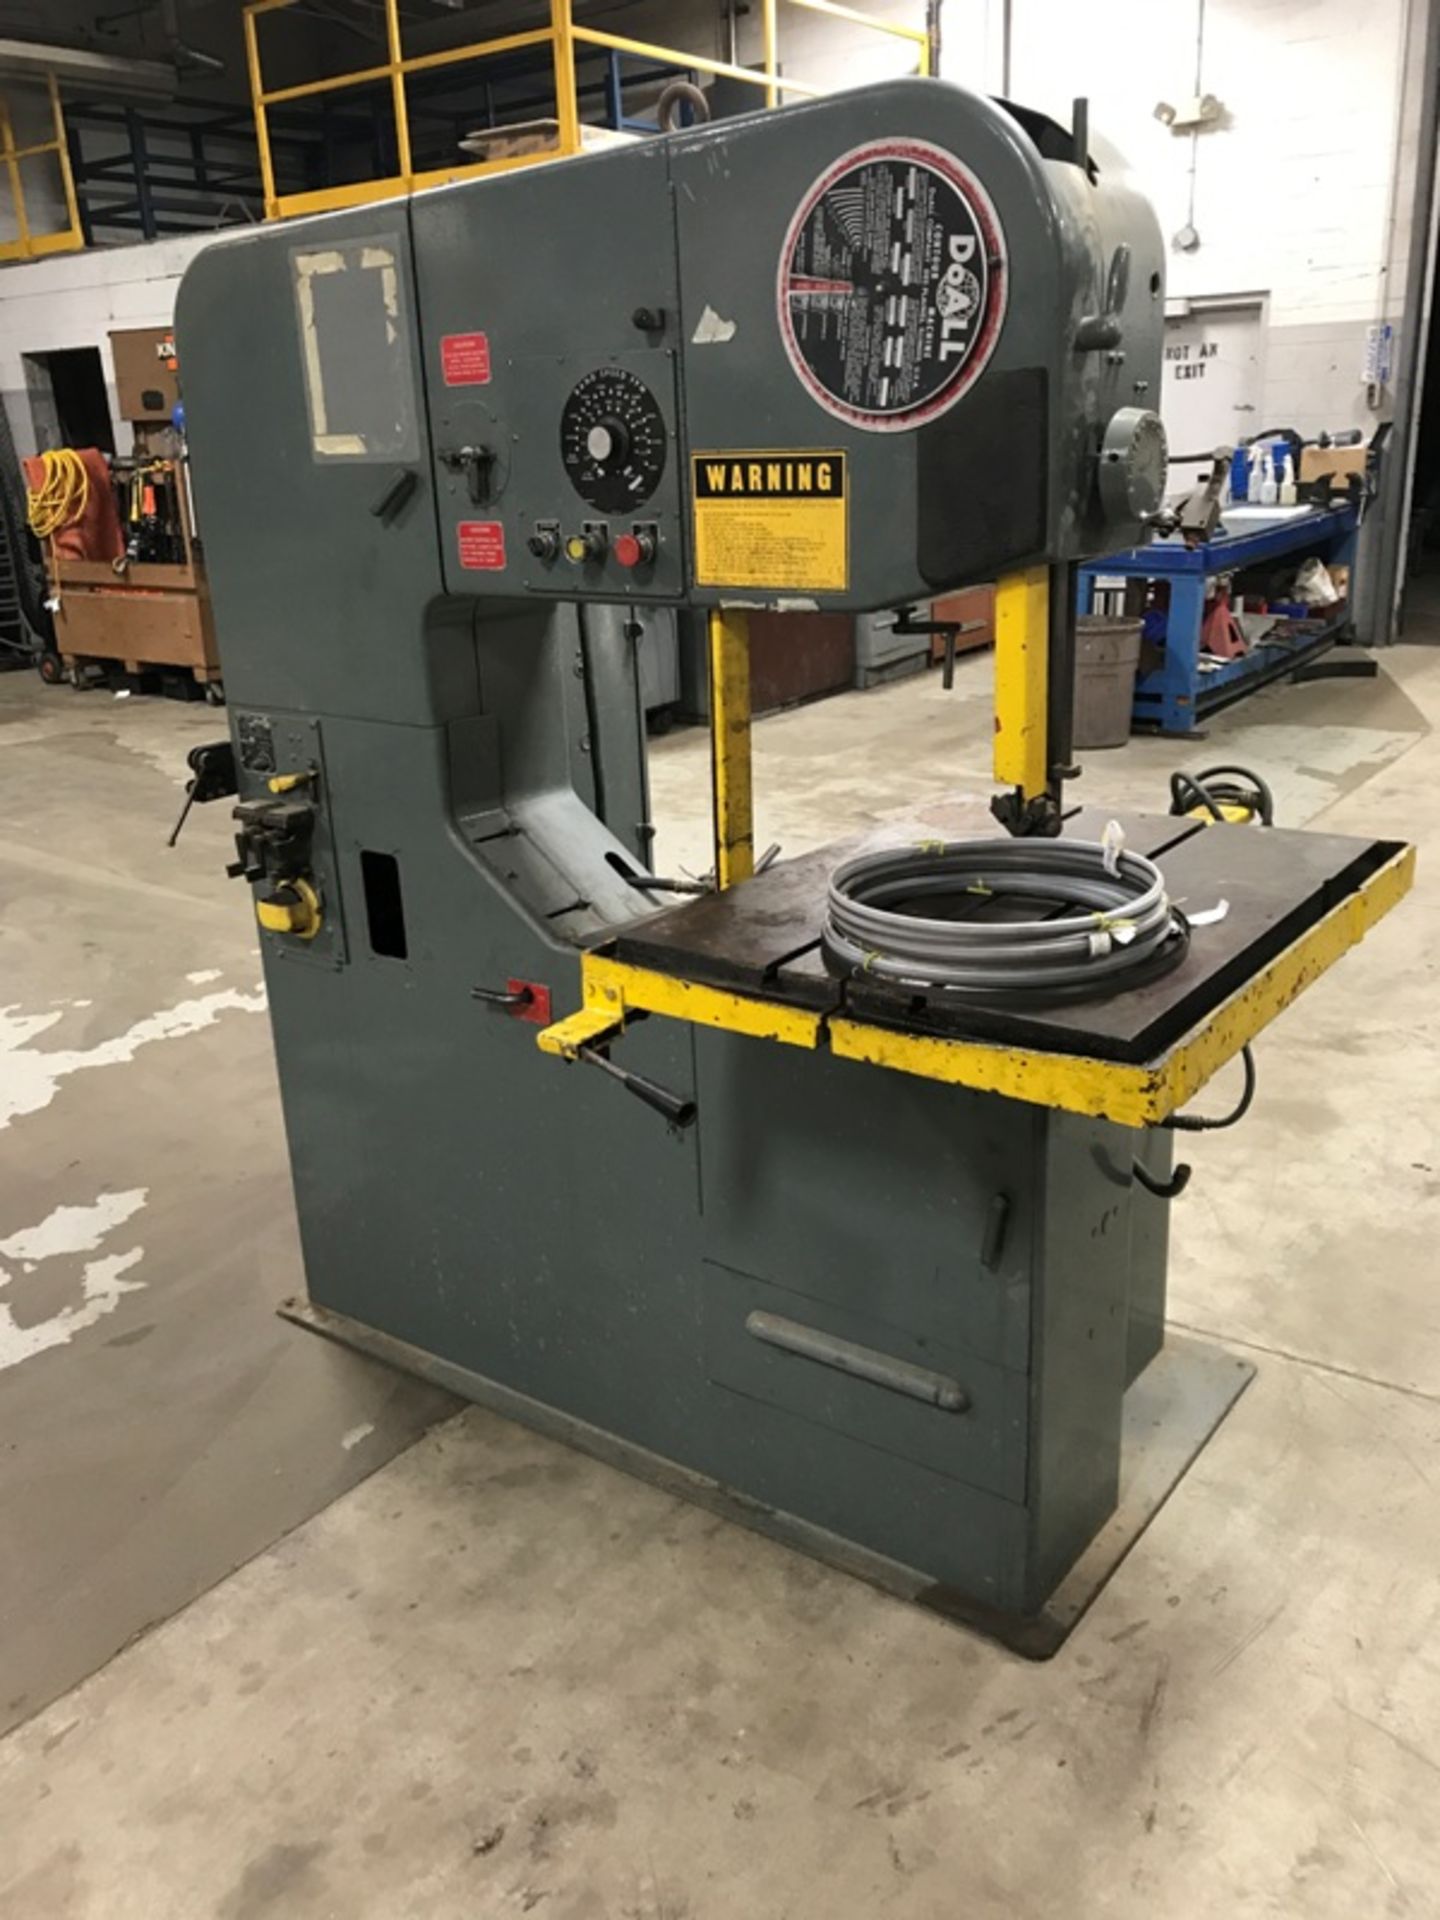 DOALL VERTICAL BAND SAW MODEL 3613-20, YEAR 1979, SN 399-79187, LOCATION MI - Image 2 of 4